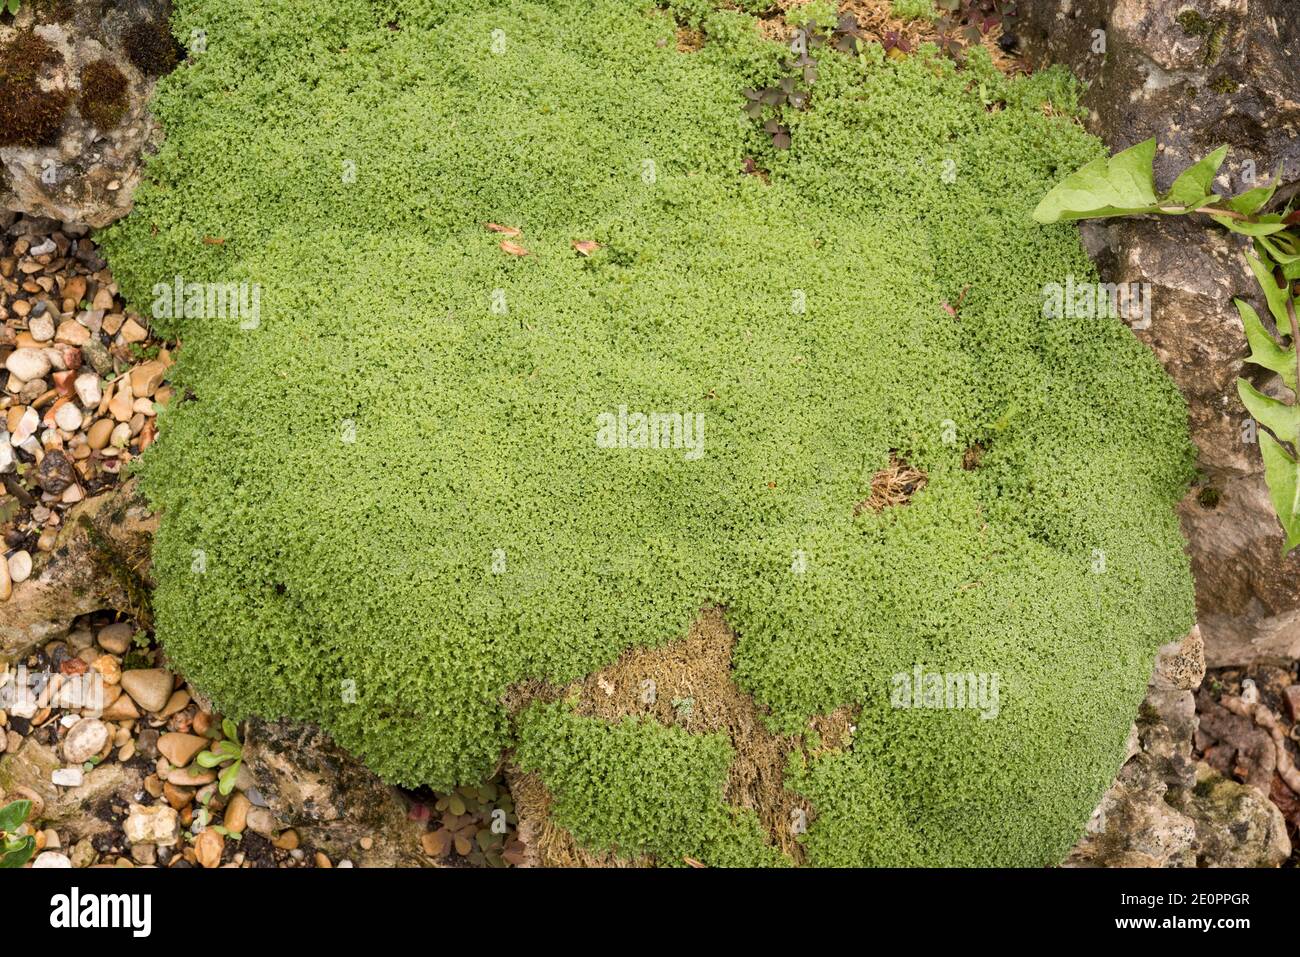 Arenaria alfacarensis is a perennial like-moss plant native to calcareous mountains of Jaen and Granada provinces. Stock Photo